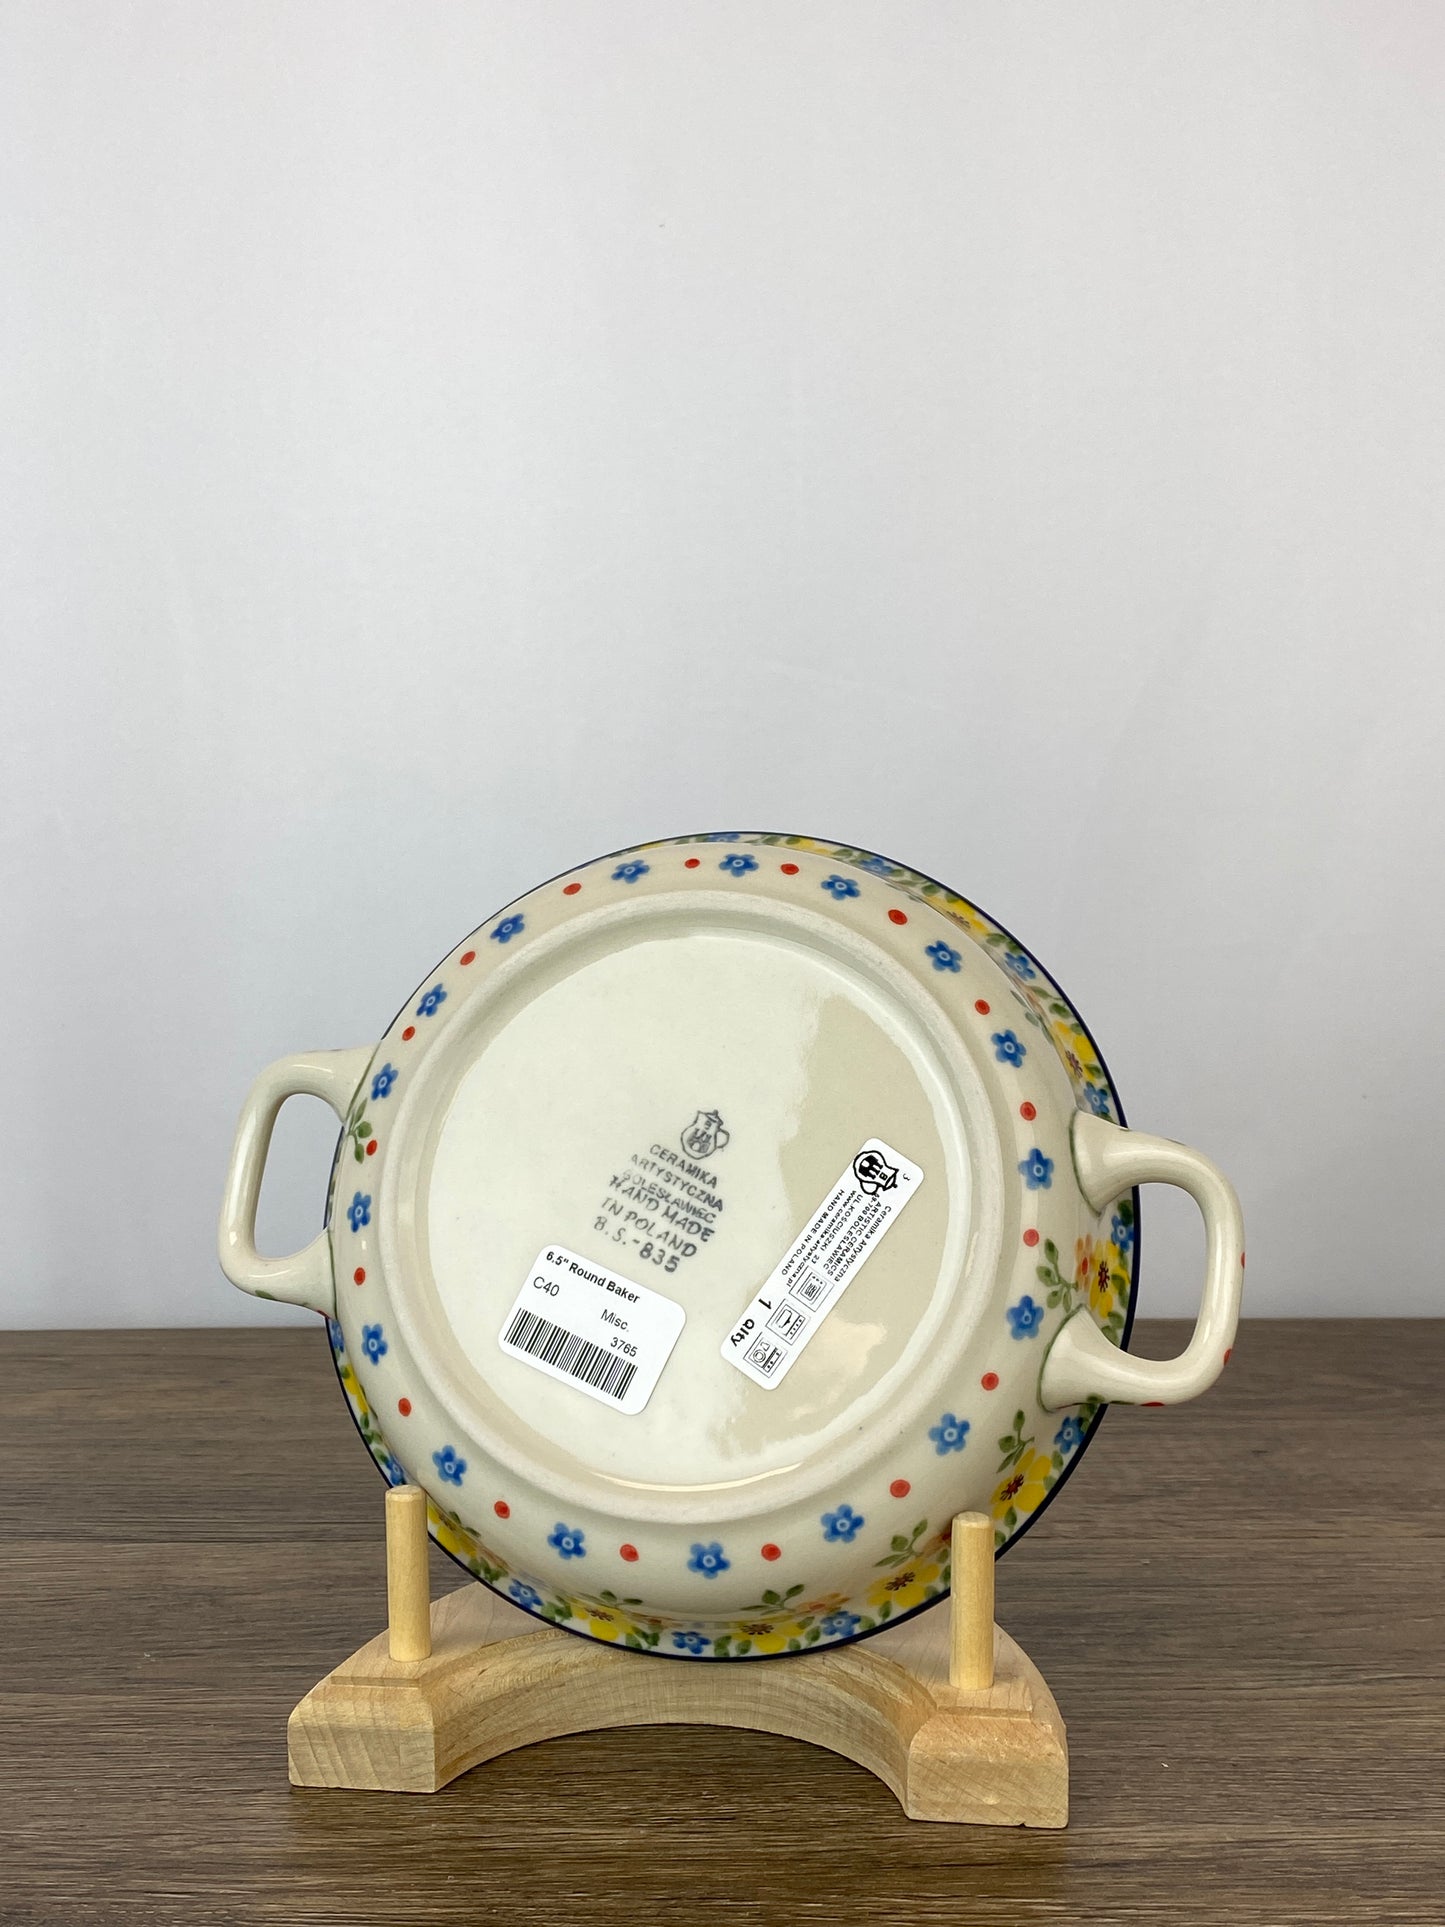 Small Round Baker with Handles - Shape C40 - Pattern 2225